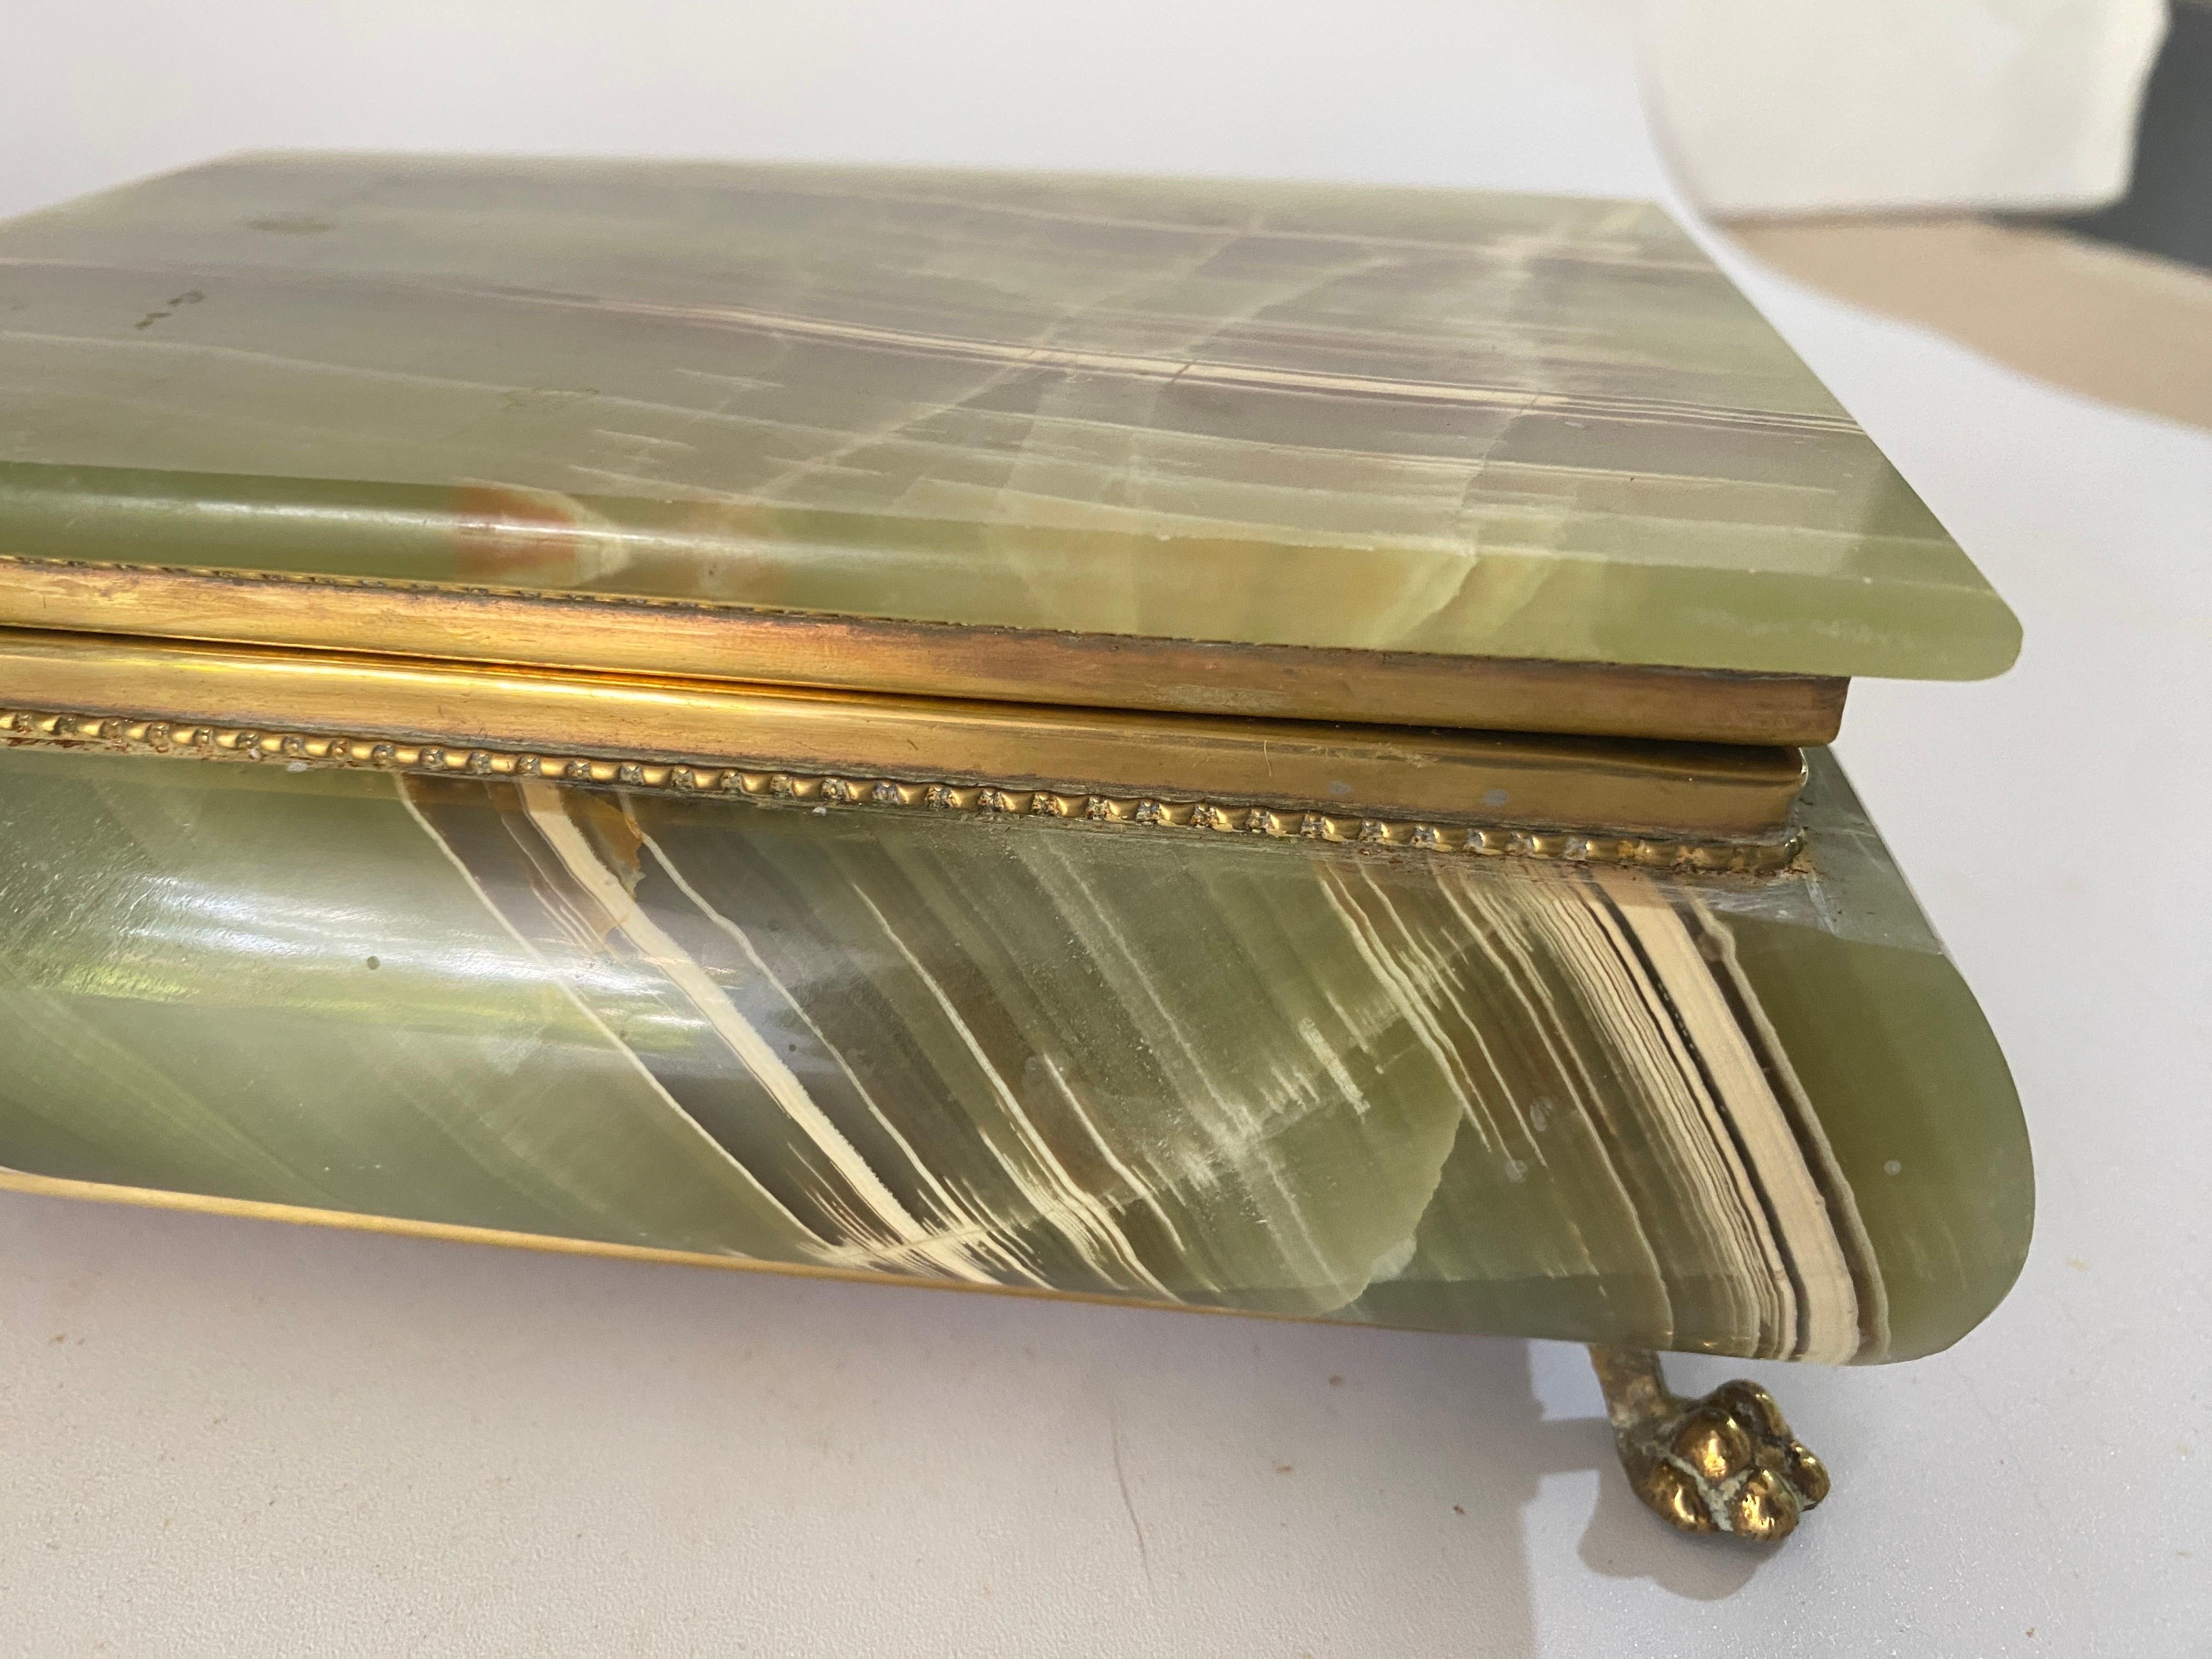  Green Onyx Marble and Brass Jewelry Display Box, Italy 1950 For Sale 6